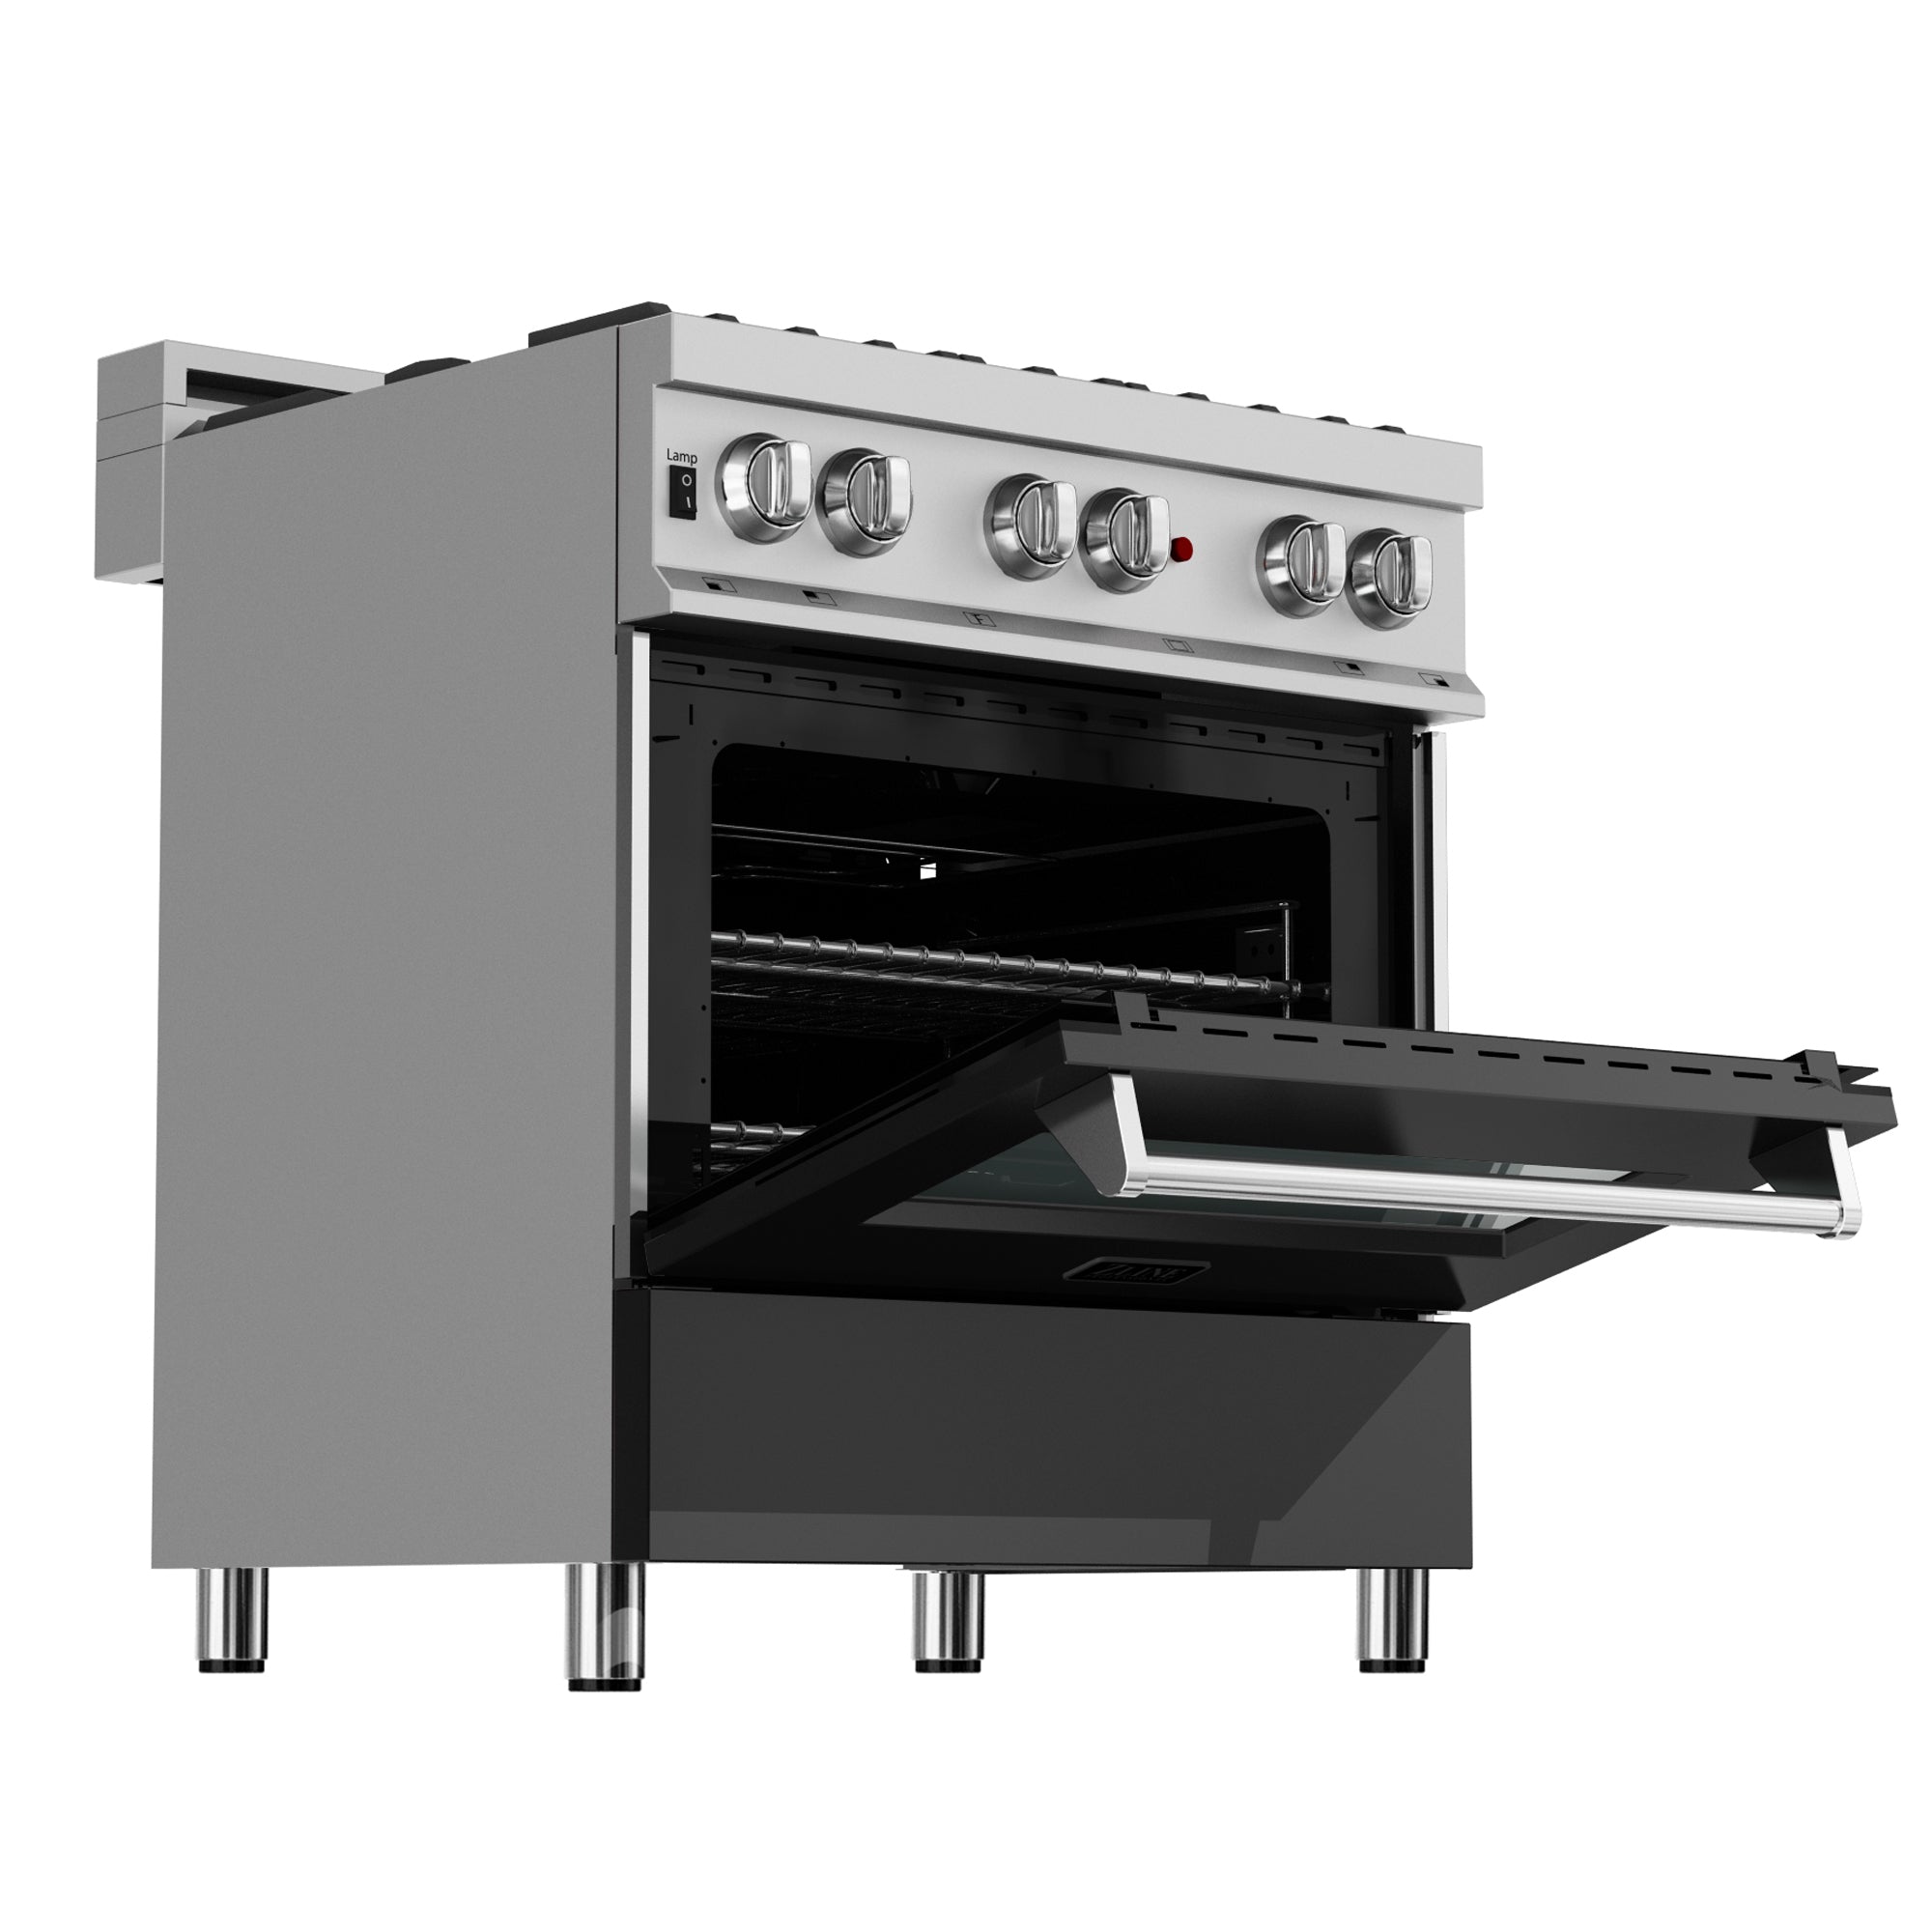 ZLINE 30" 4.0 cu. ft. Dual Fuel Range with Gas Stove and Electric Oven in Fingerprint Resistant Stainless Steel and Black Matte Door (RAS-BLM-30)